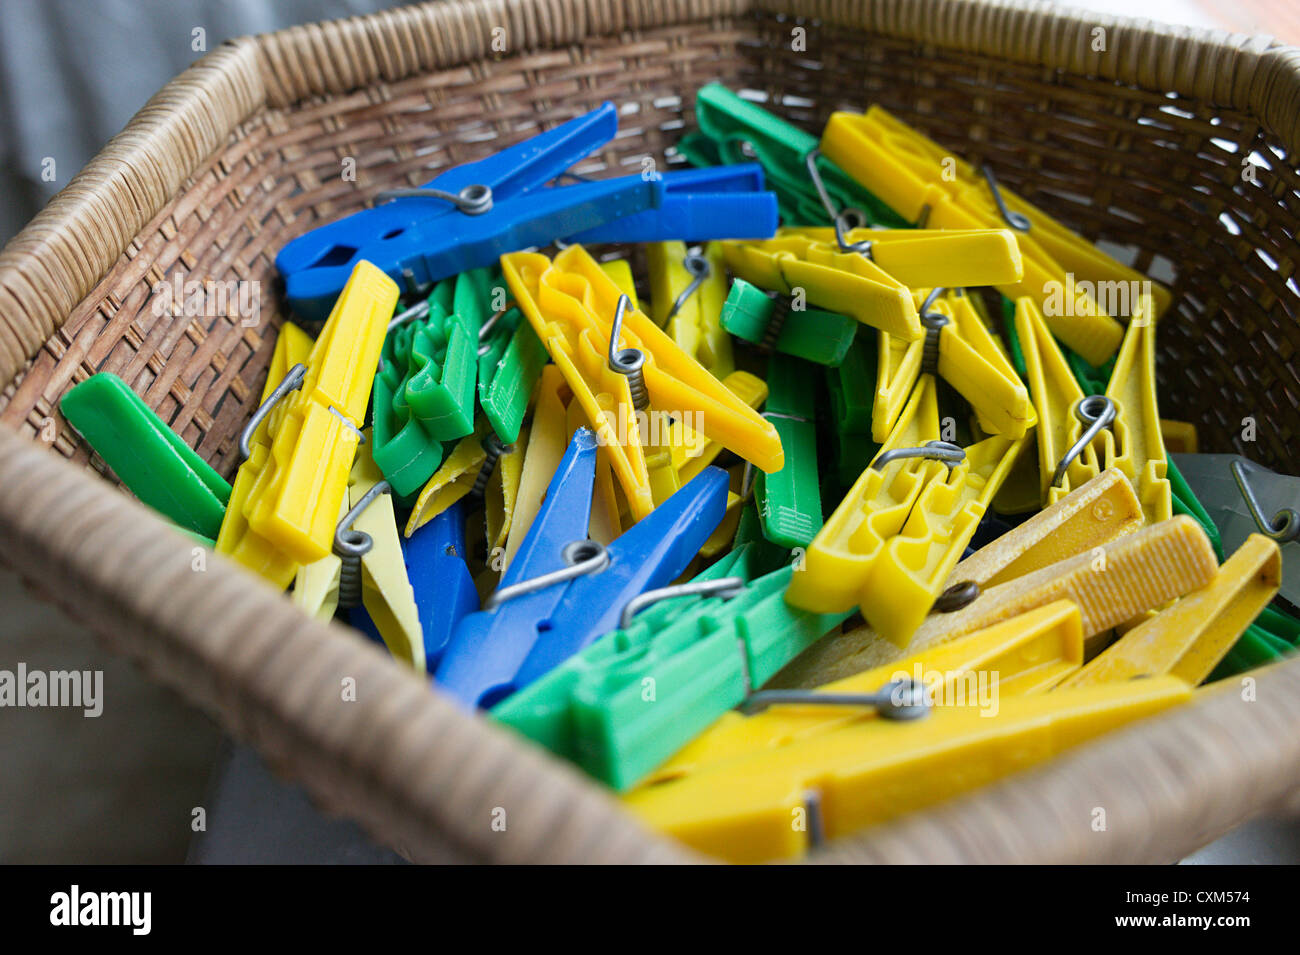 Pile of yellow, blue and green plastic clothes pegs Stock Photo